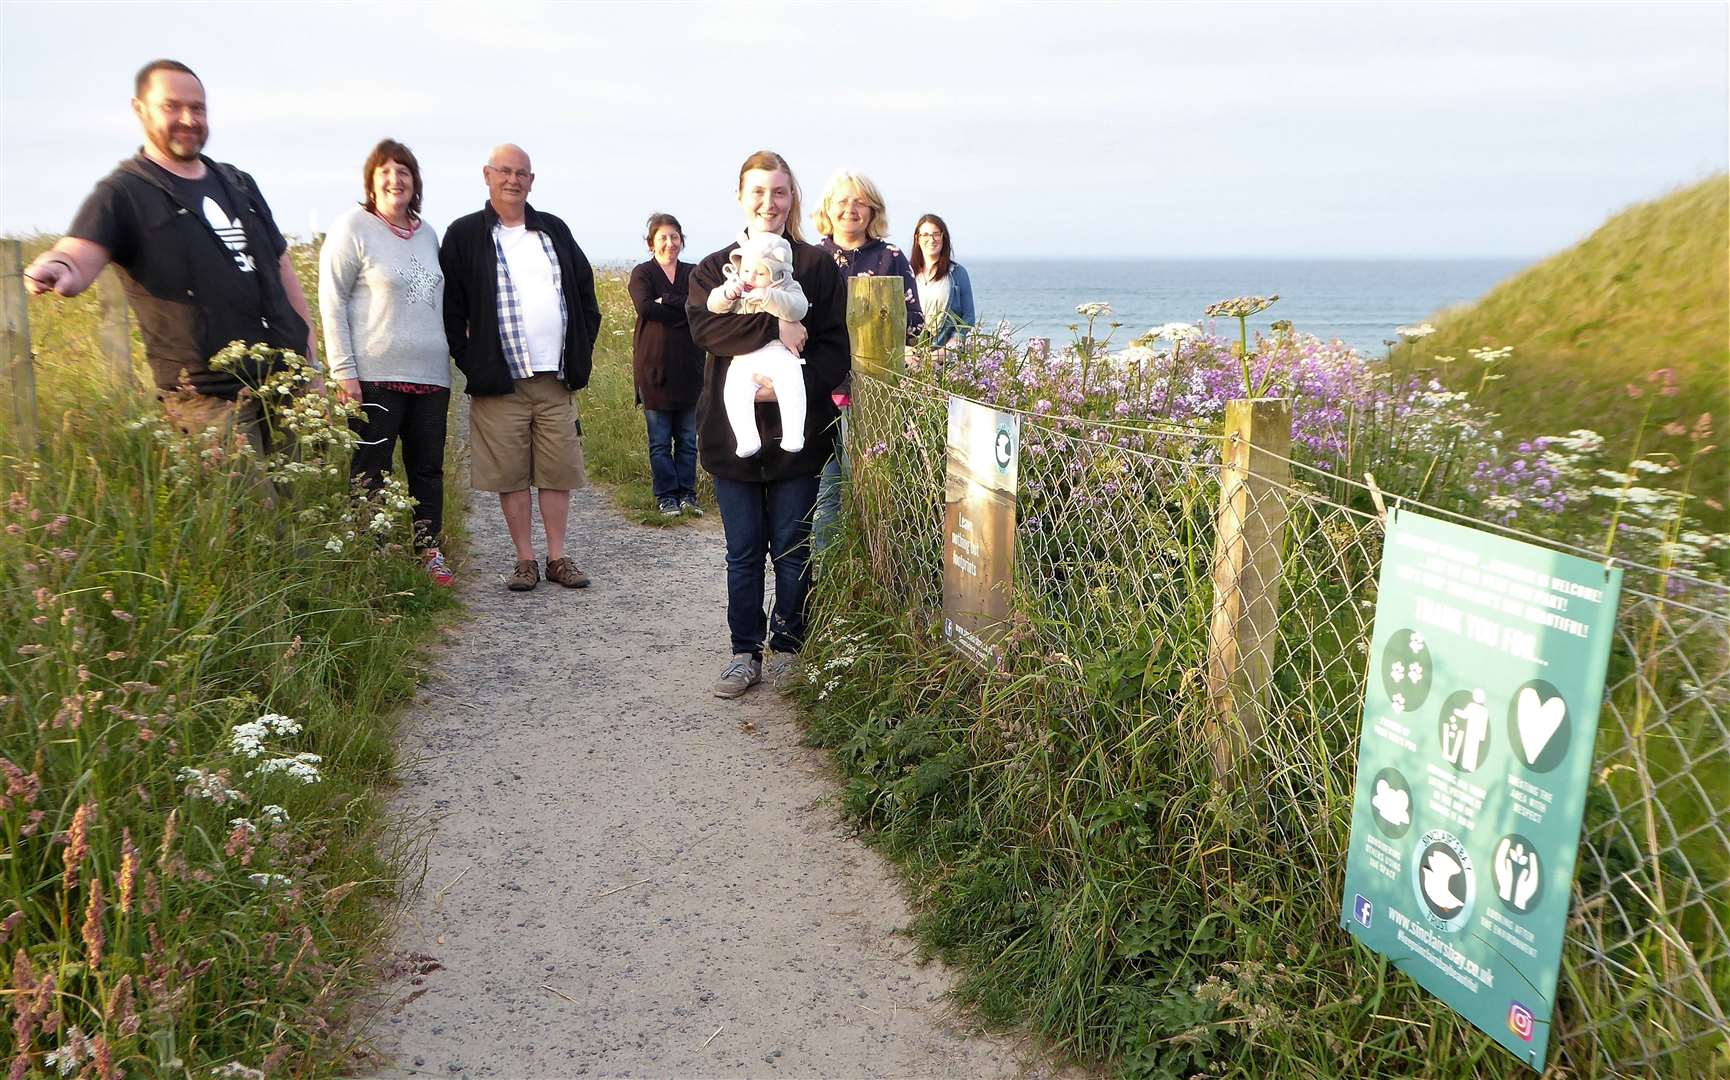 Sinclair's Bay Trust board members pictured from left at Reiss beach are Ian Ross, Pat Ramsay, Grant Ramsay, Maysie Calder, Christina Calder (with baby Isla), Maria Aitken and Emma Fraser. Missing from the photo are board members Andrew Mackay and Lynsay Rosie. Picture: DGS